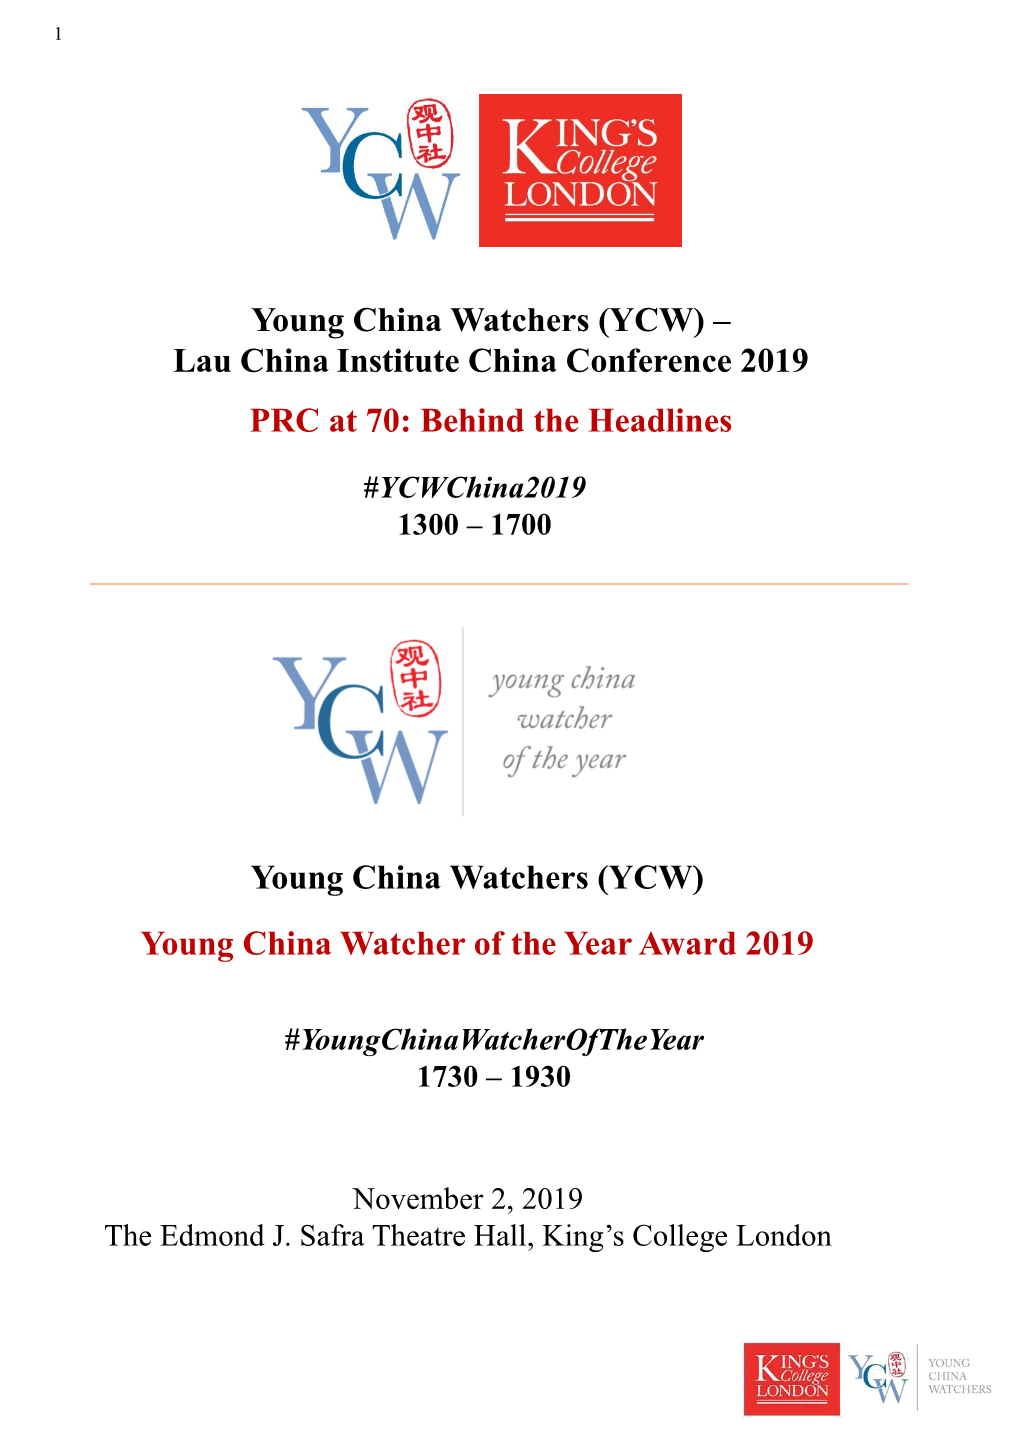 (YCW) – Lau China Institute China Conference 2019 PRC at 70